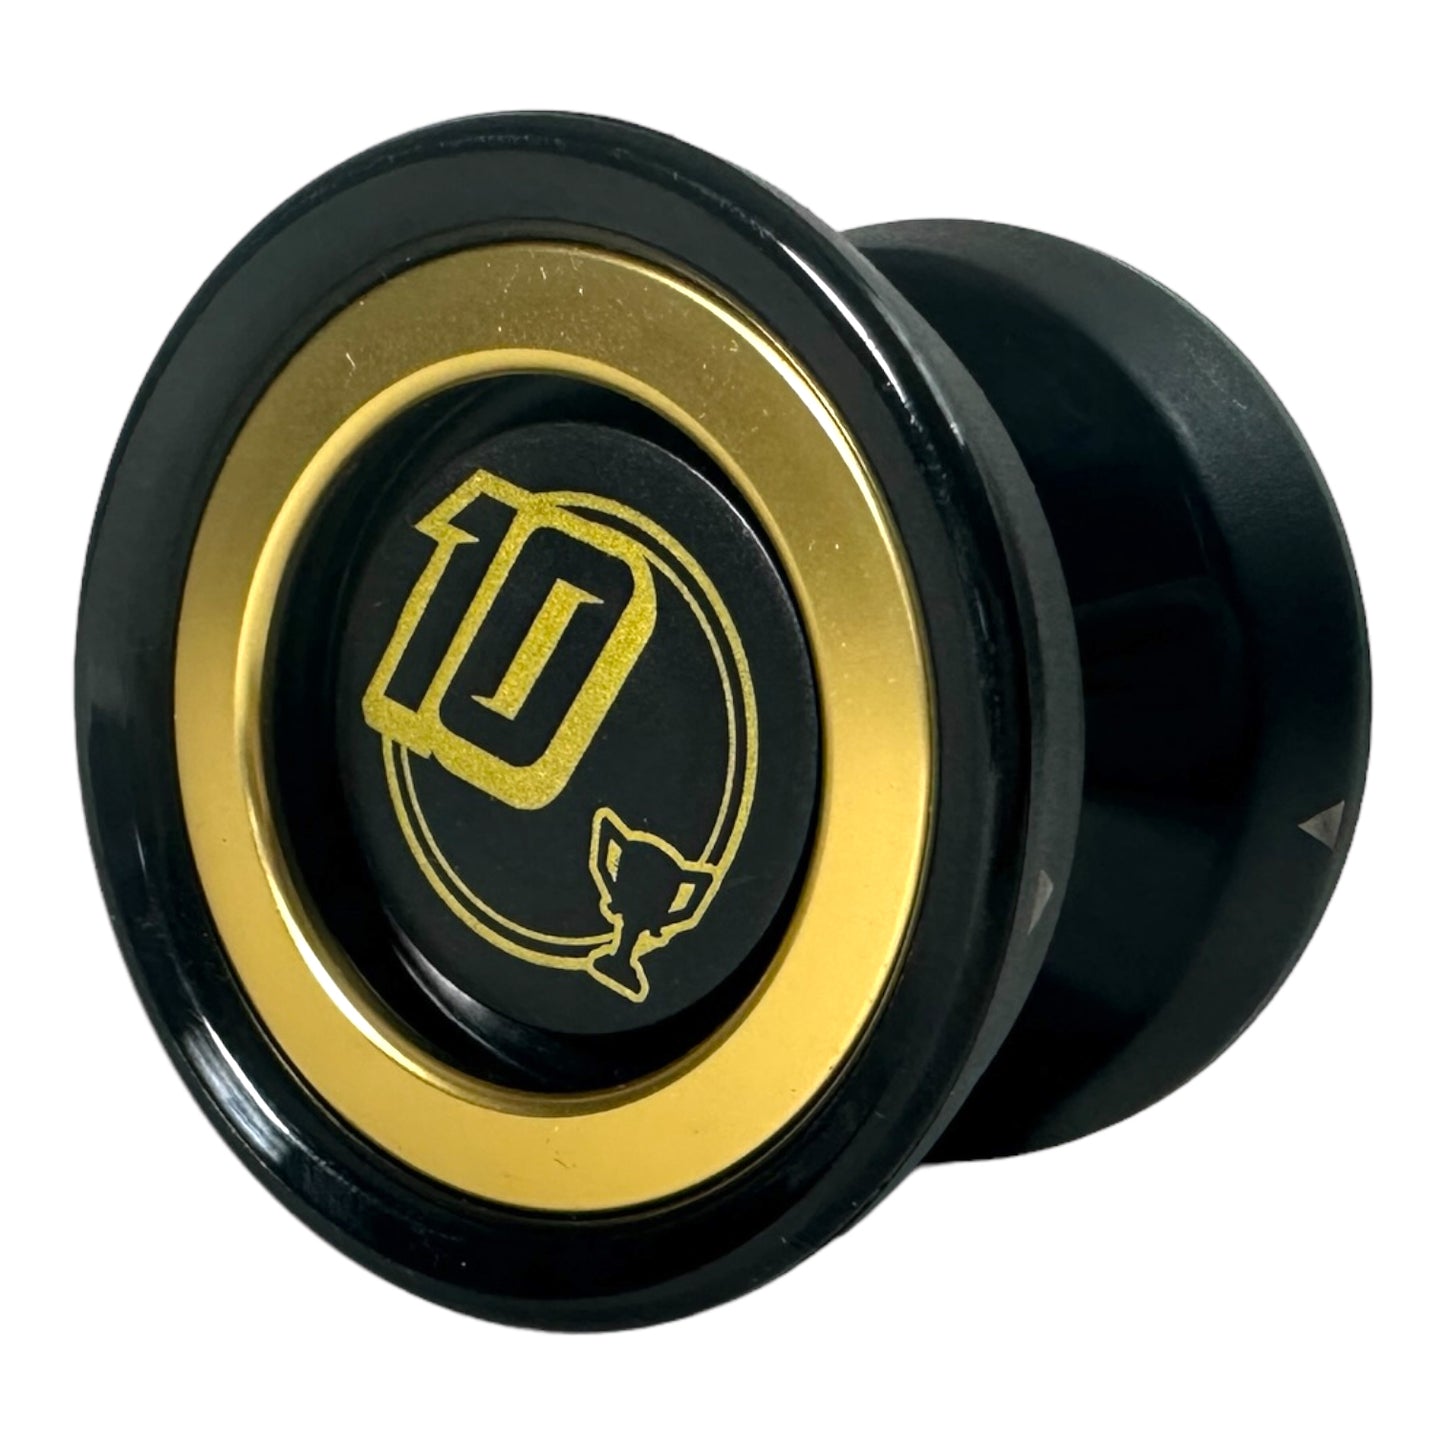 NorthStar YoYo black with gold rim angle view